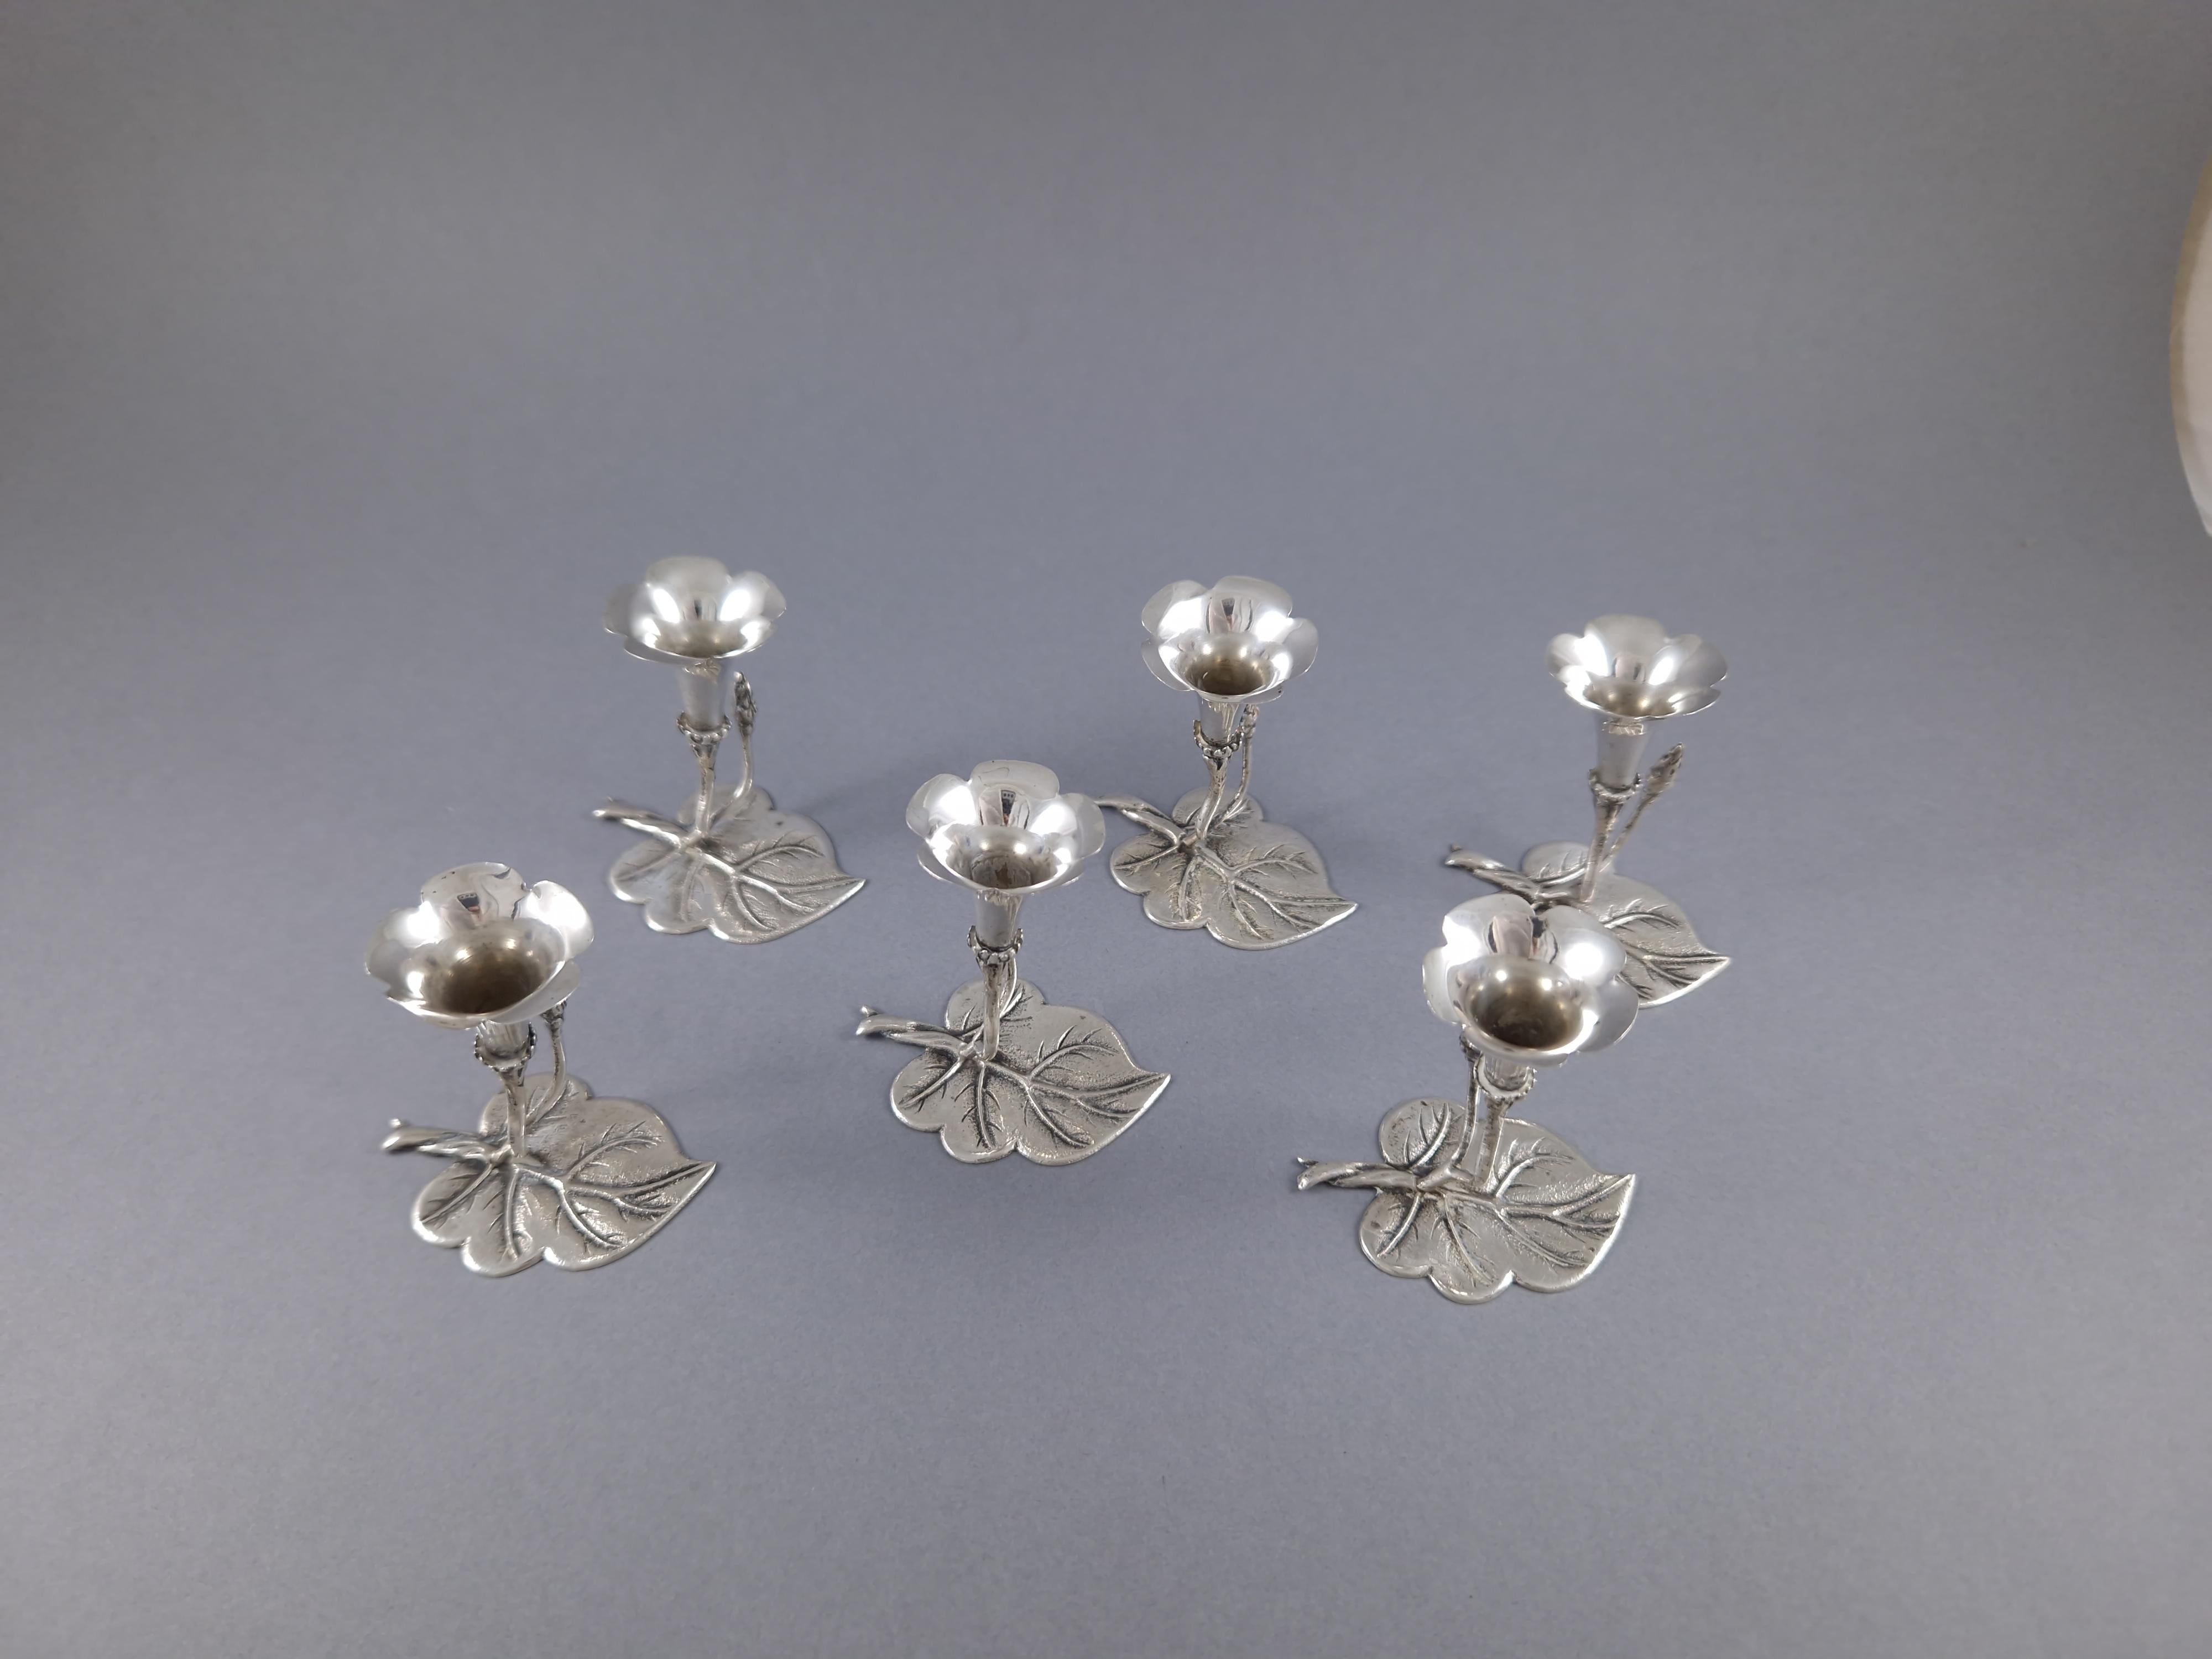 Set of 6 place card holders and bouquet holders in Sterling silver in the shape of flowers and leaves 
Silver hallmark 800 
Height: 5.6 cm 
Length: 5.1 cm 
Weight: 89 grams